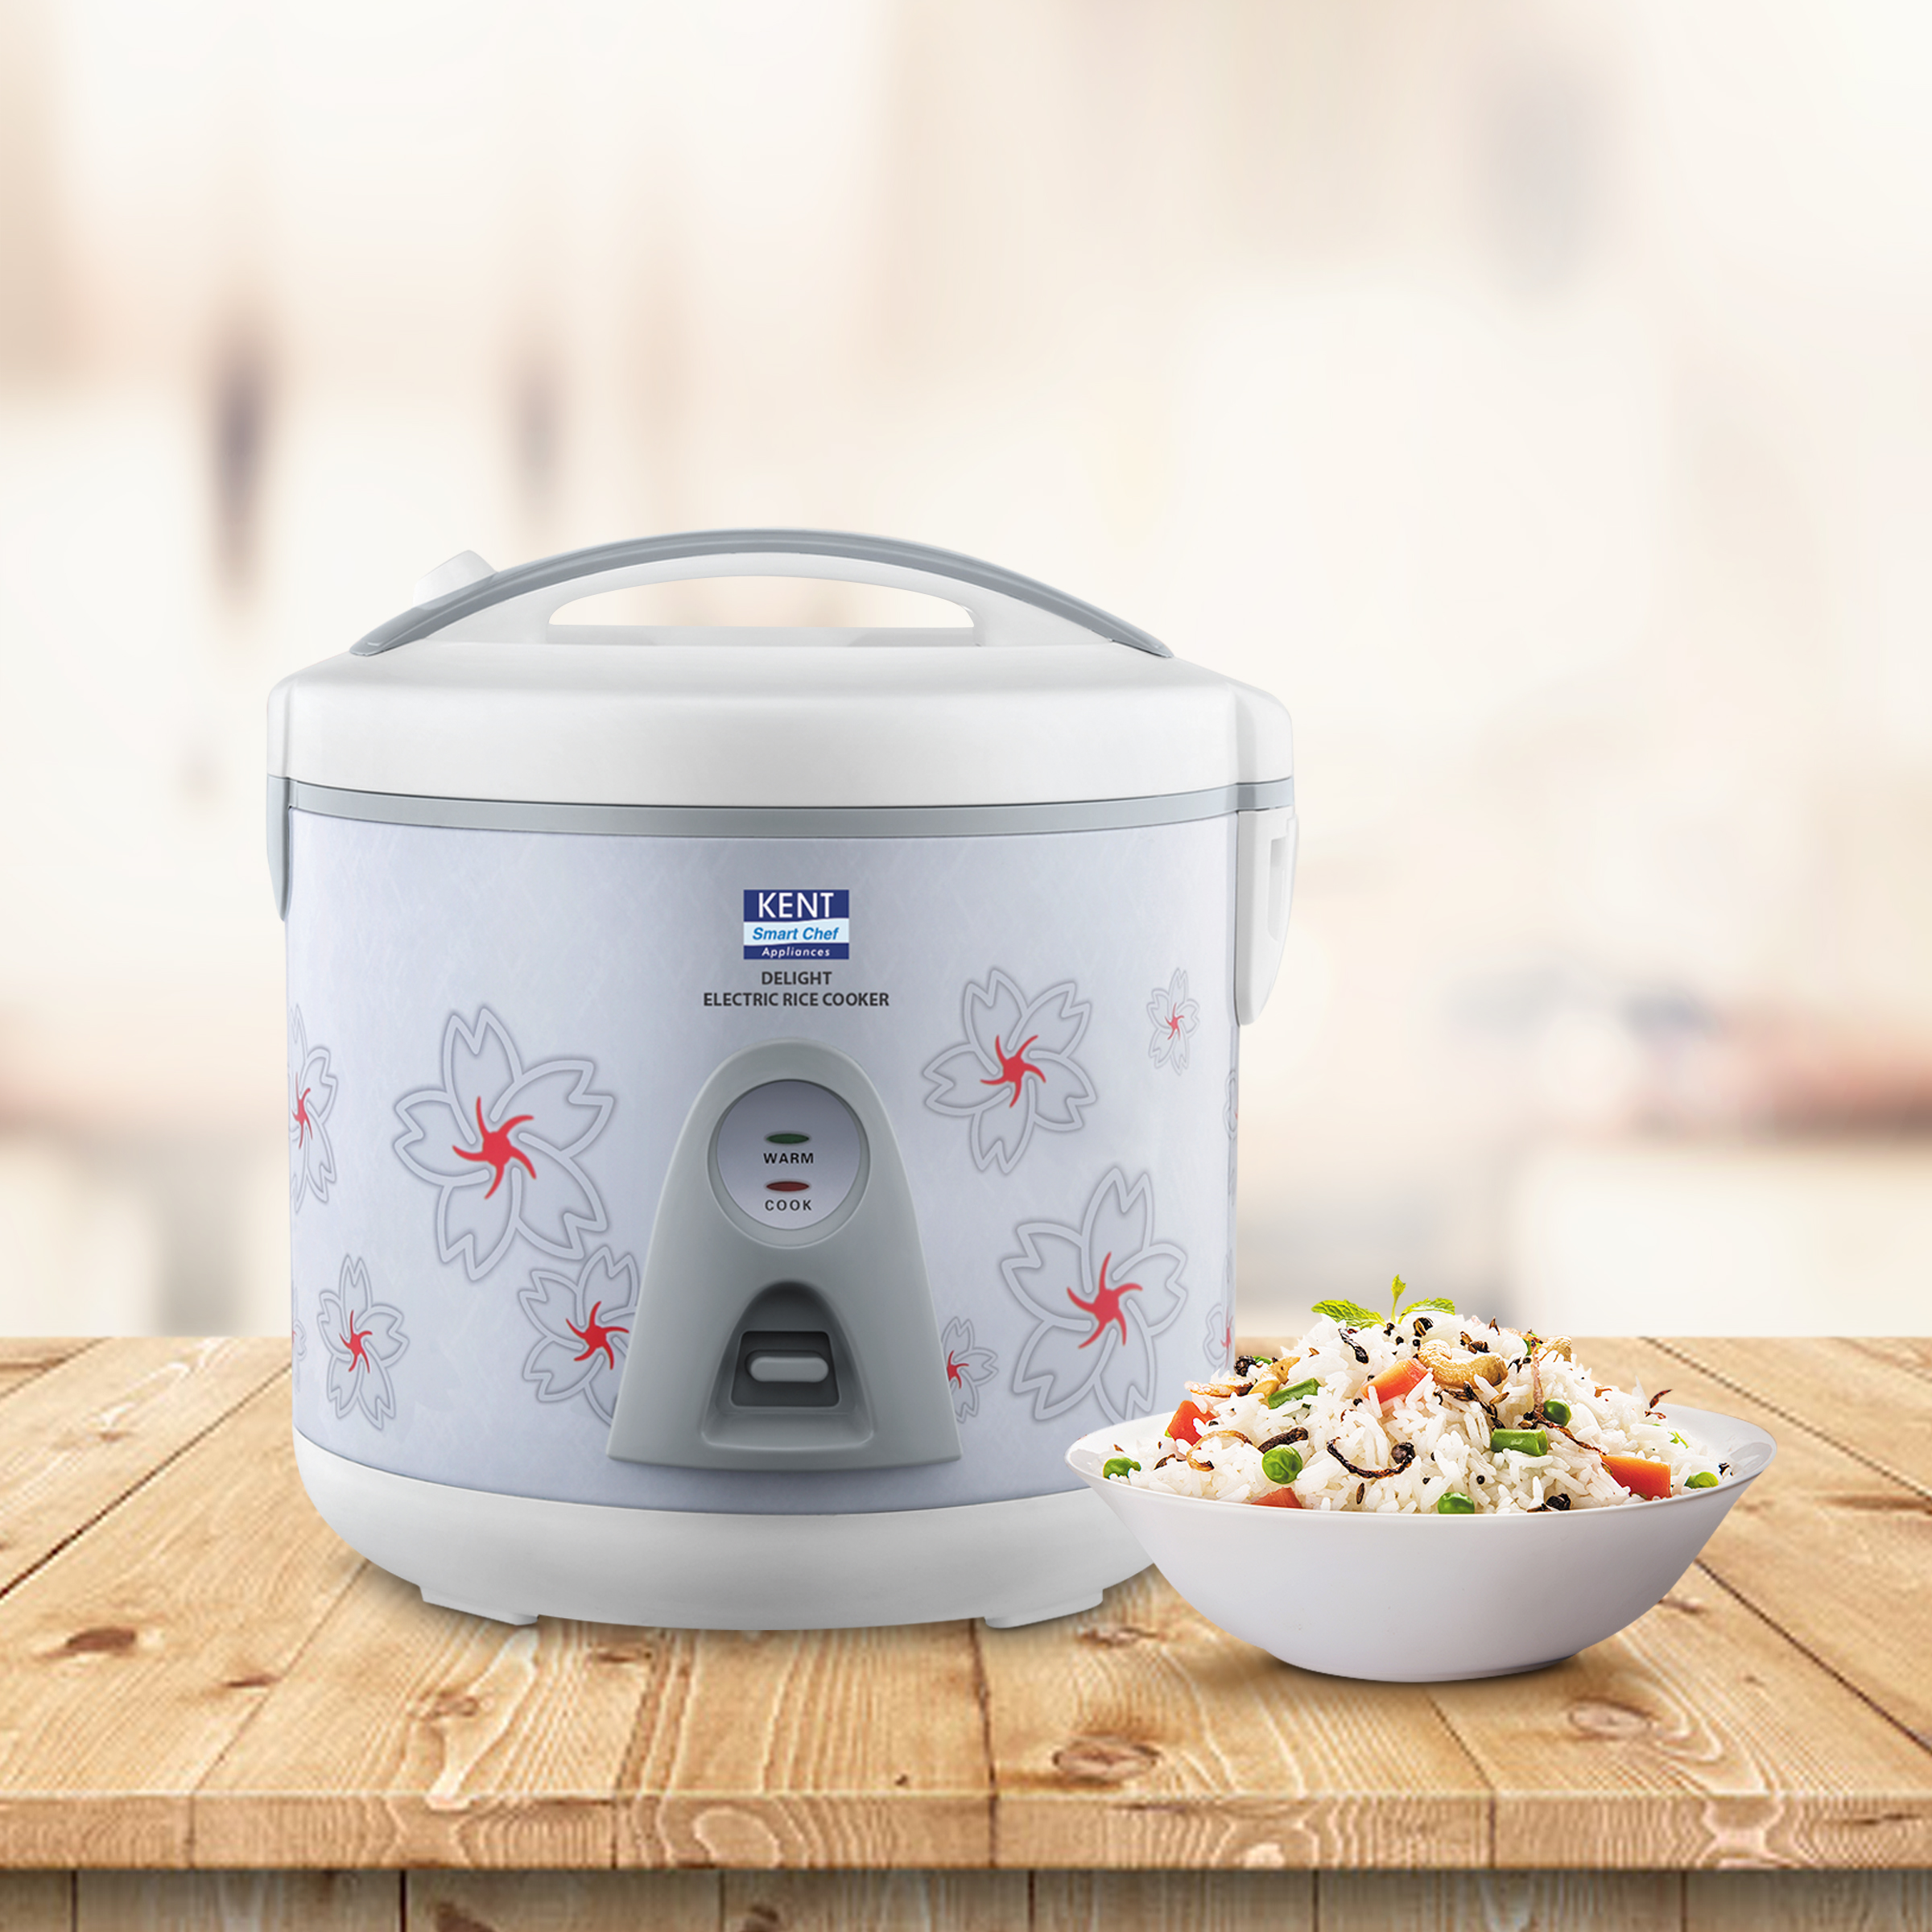 KENT Delight Electric Rice Cooker 1.8 L - Price, Reviews, Features